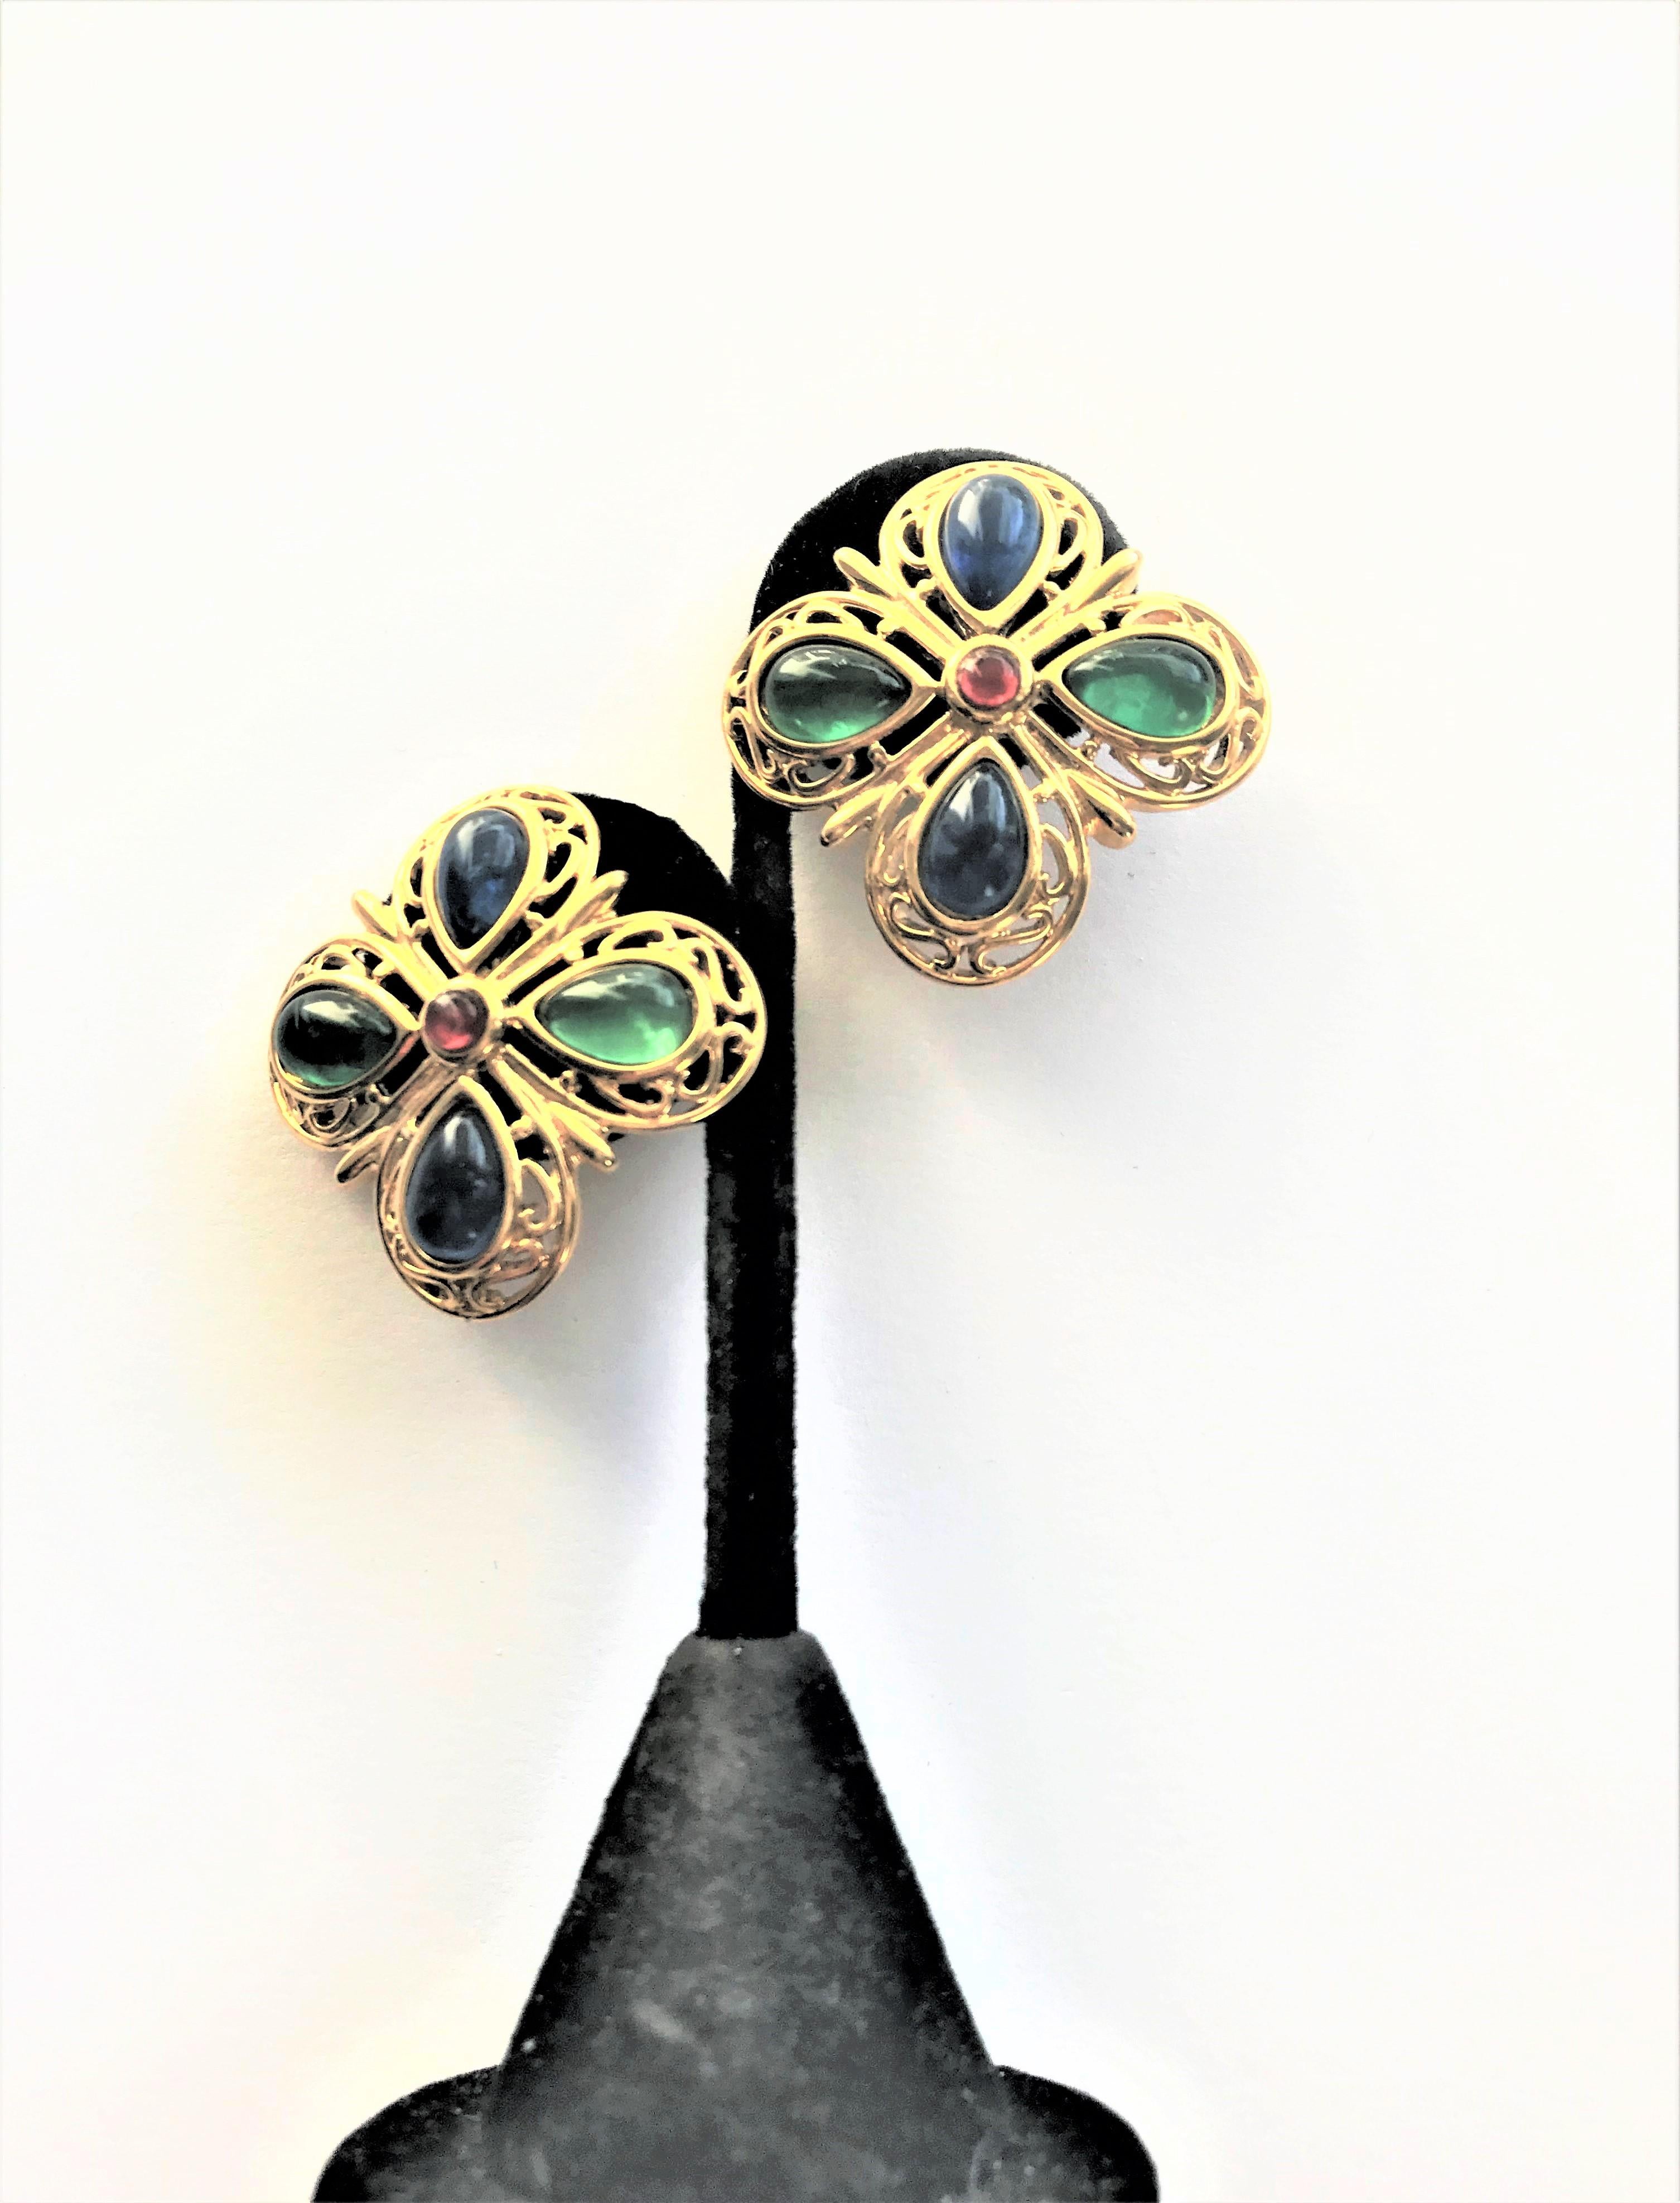 Trifari ear clips in the shape of 2 4-leaf clover with blue and green  glass drops. Edged with openwork gold work. In the middle a small red glas stone. On the back of the clips bracket Trifari signature. 
Measurement:  3.5 x 3.5 cm - easy to wear -